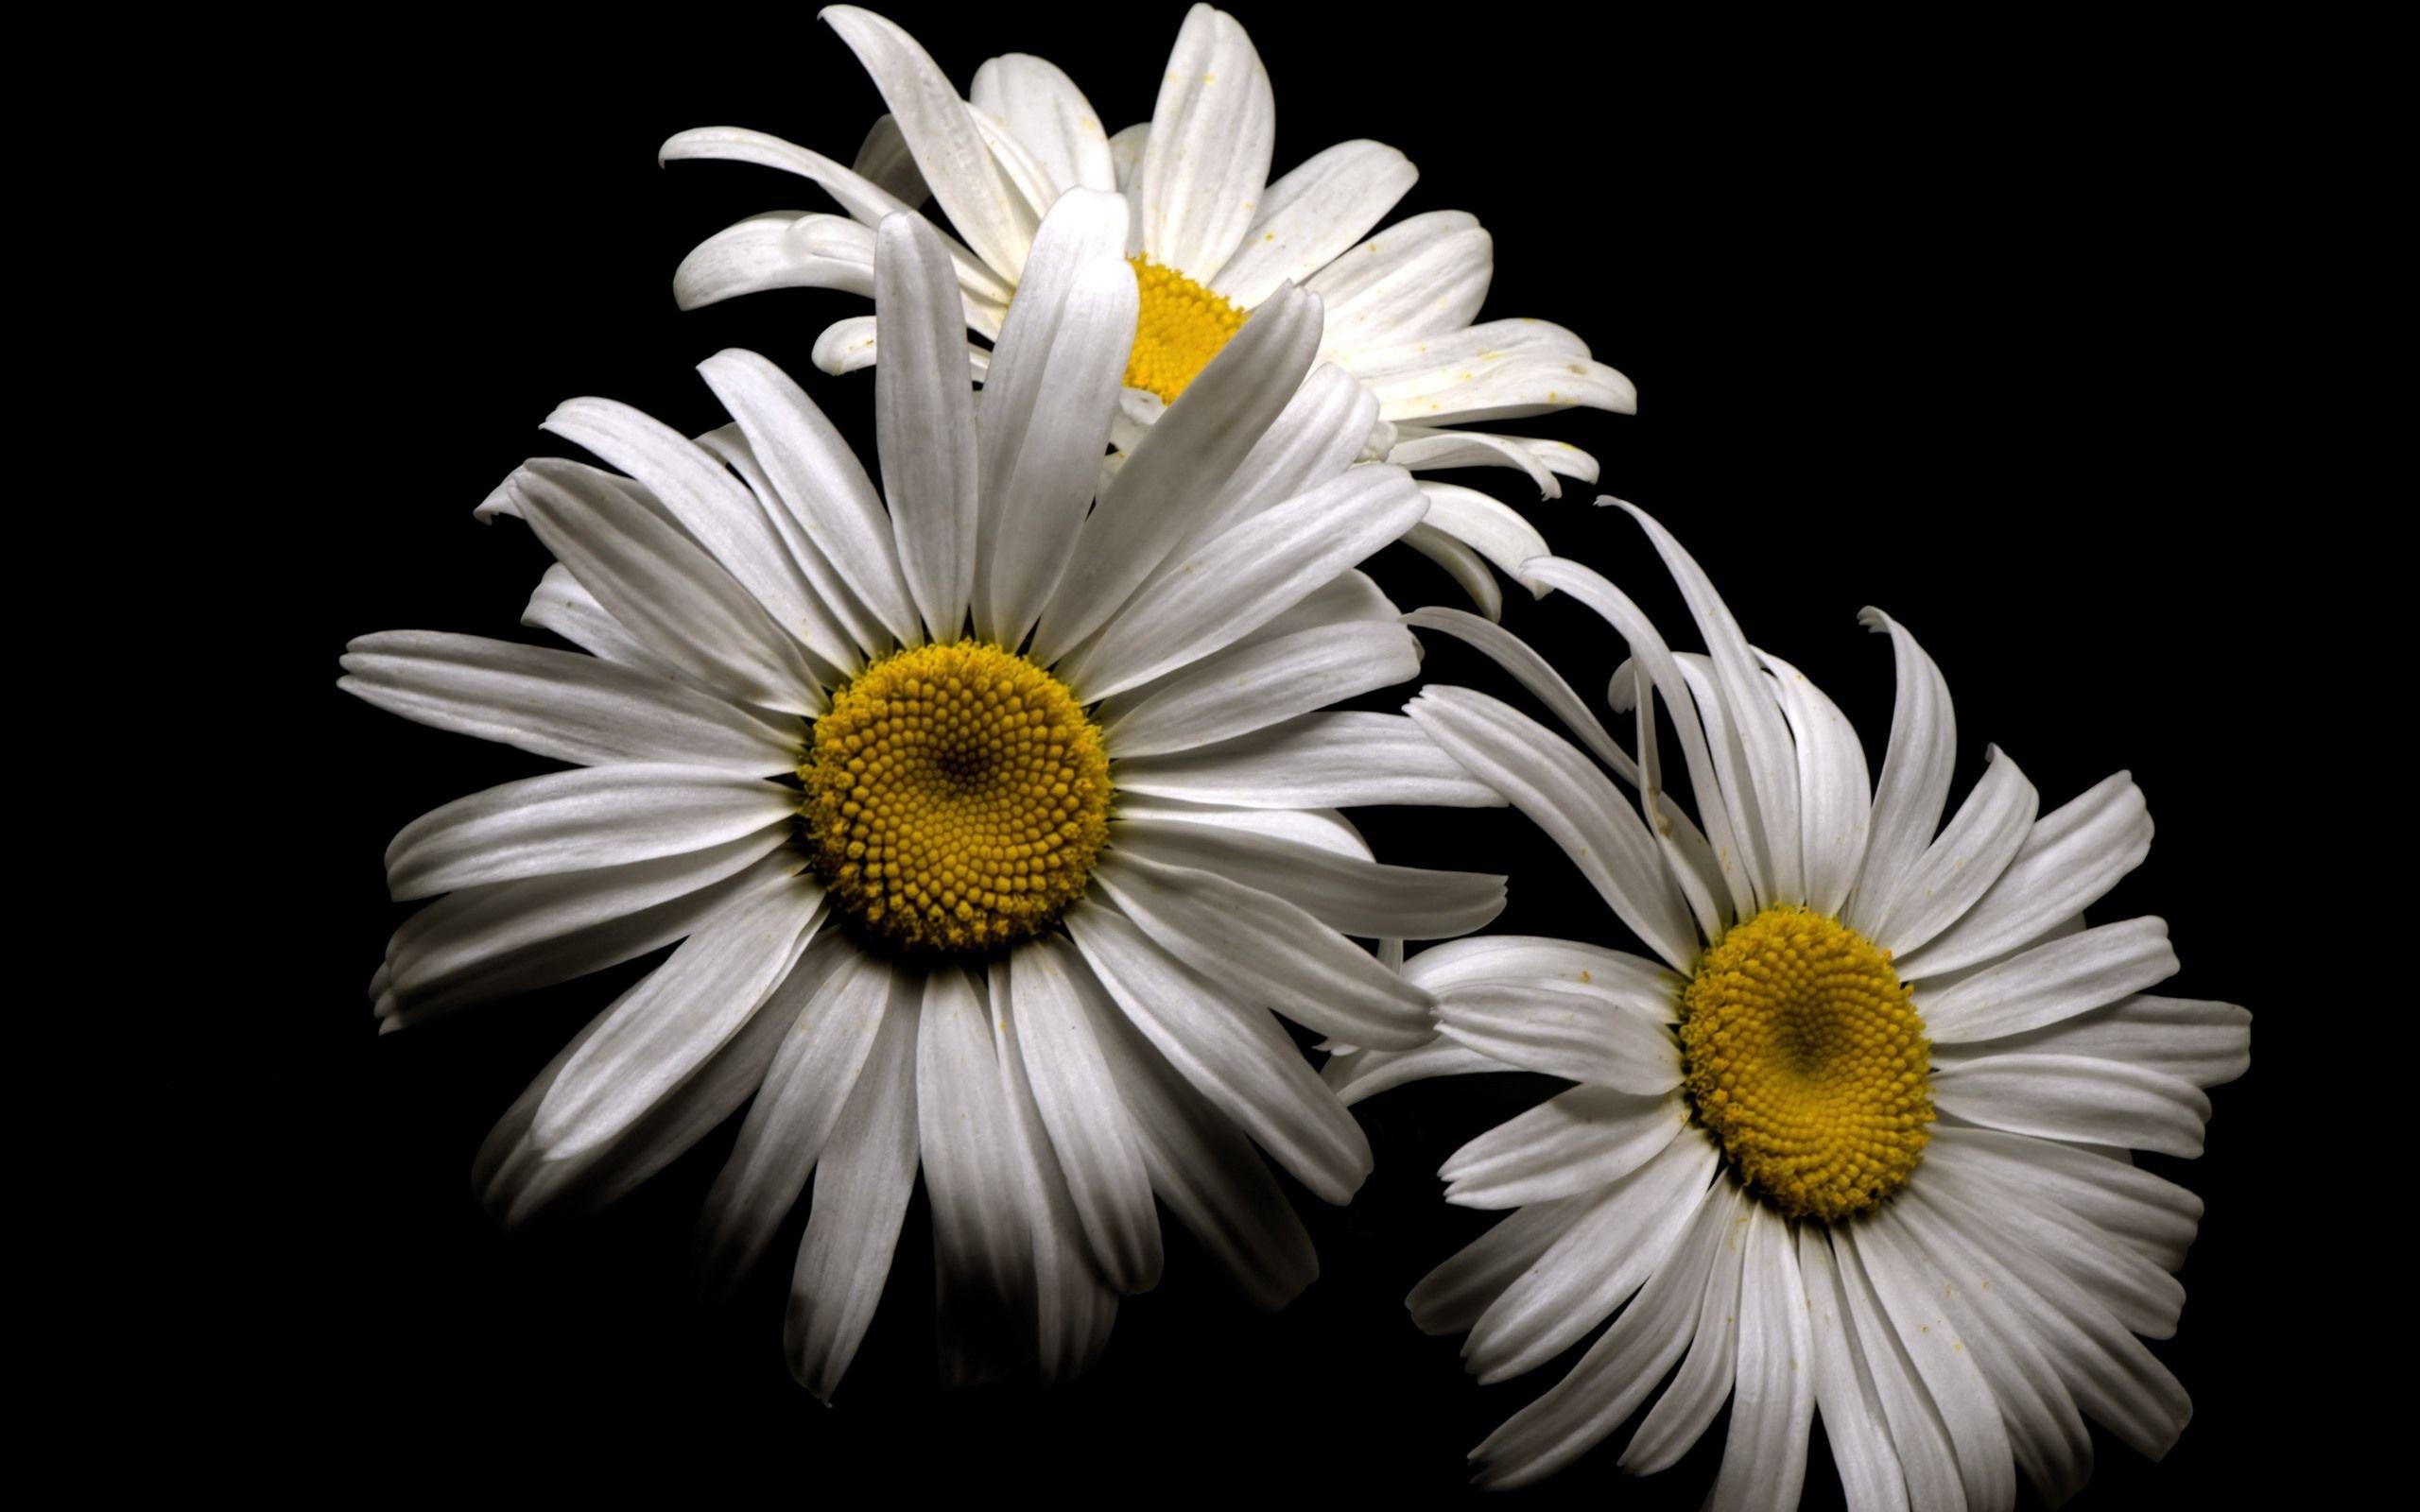 Black and White Daisy Wallpapers - Top Free Black and White Daisy